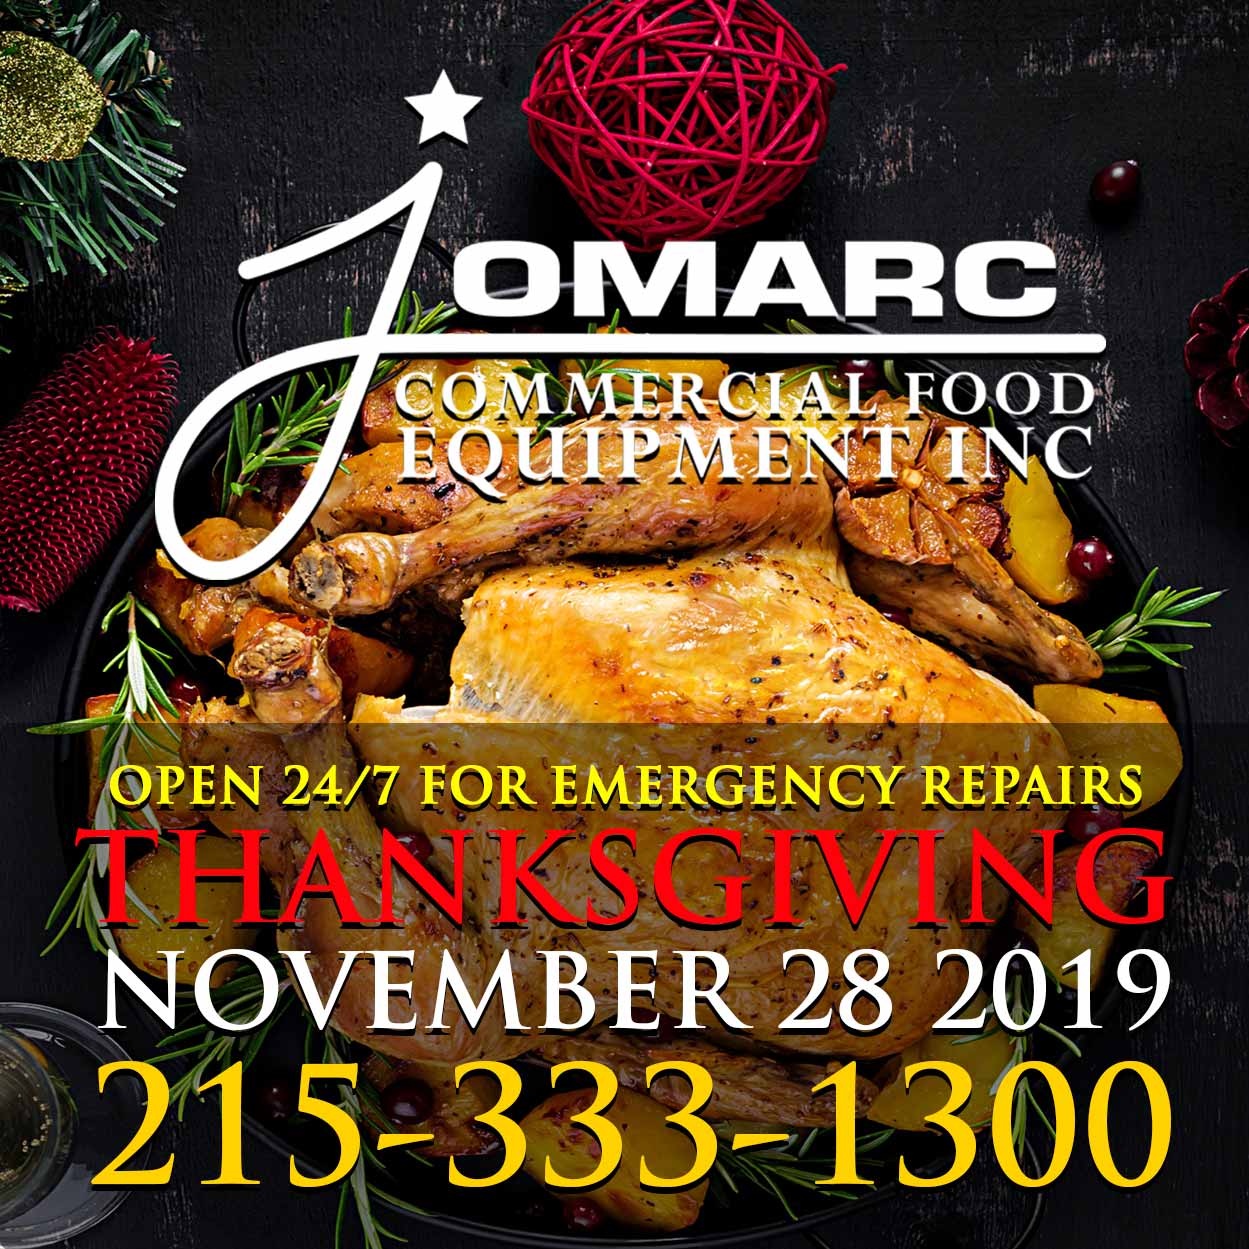 Jomarc is open Thanksgiving Day 2019 for Emergency Repairs! 